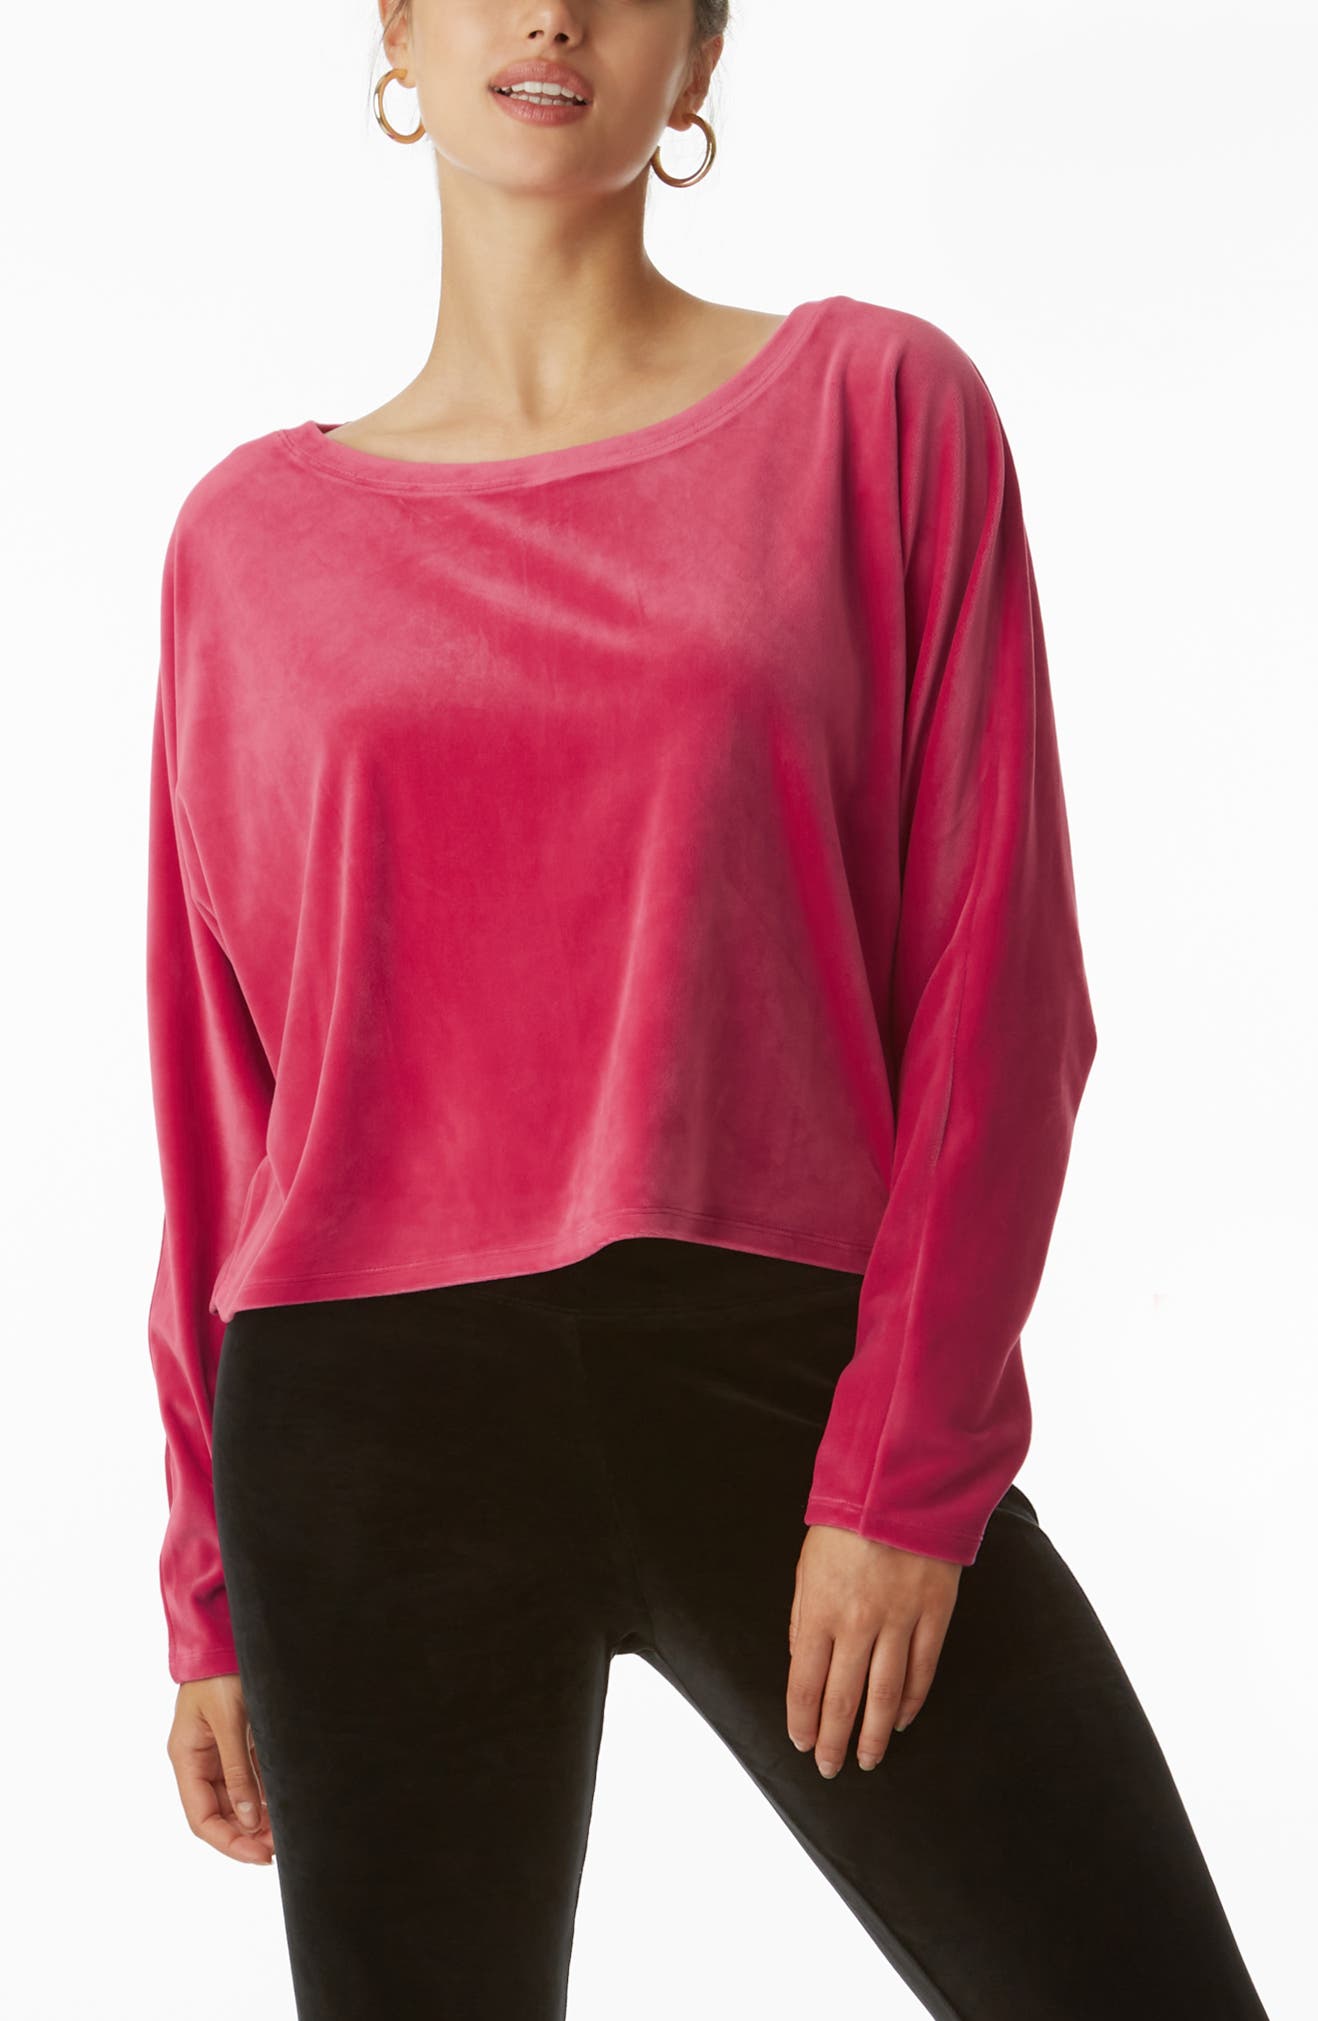 JUICY COUTURE Stretch Velvet Dolman Sleeve Top, Main, color, PINK PARTY